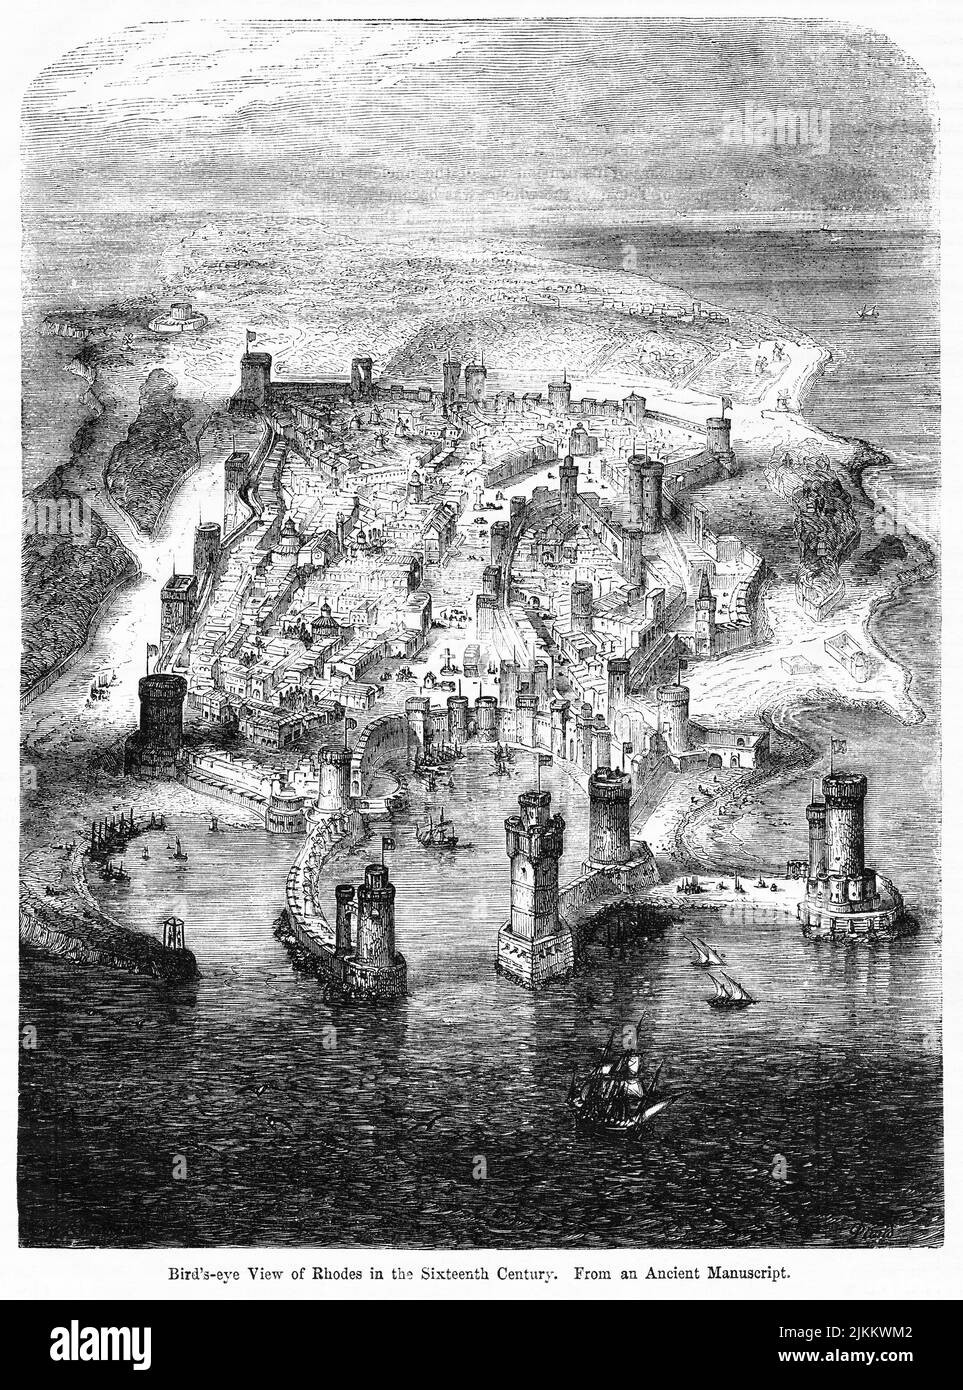 Bird’s-eye view of Rhodes in the Sixteenth Century, Illustration from the Book, 'John Cassel’s Illustrated History of England, Volume II', text by William Howitt, Cassell, Petter, and Galpin, London, 1858 Stock Photo